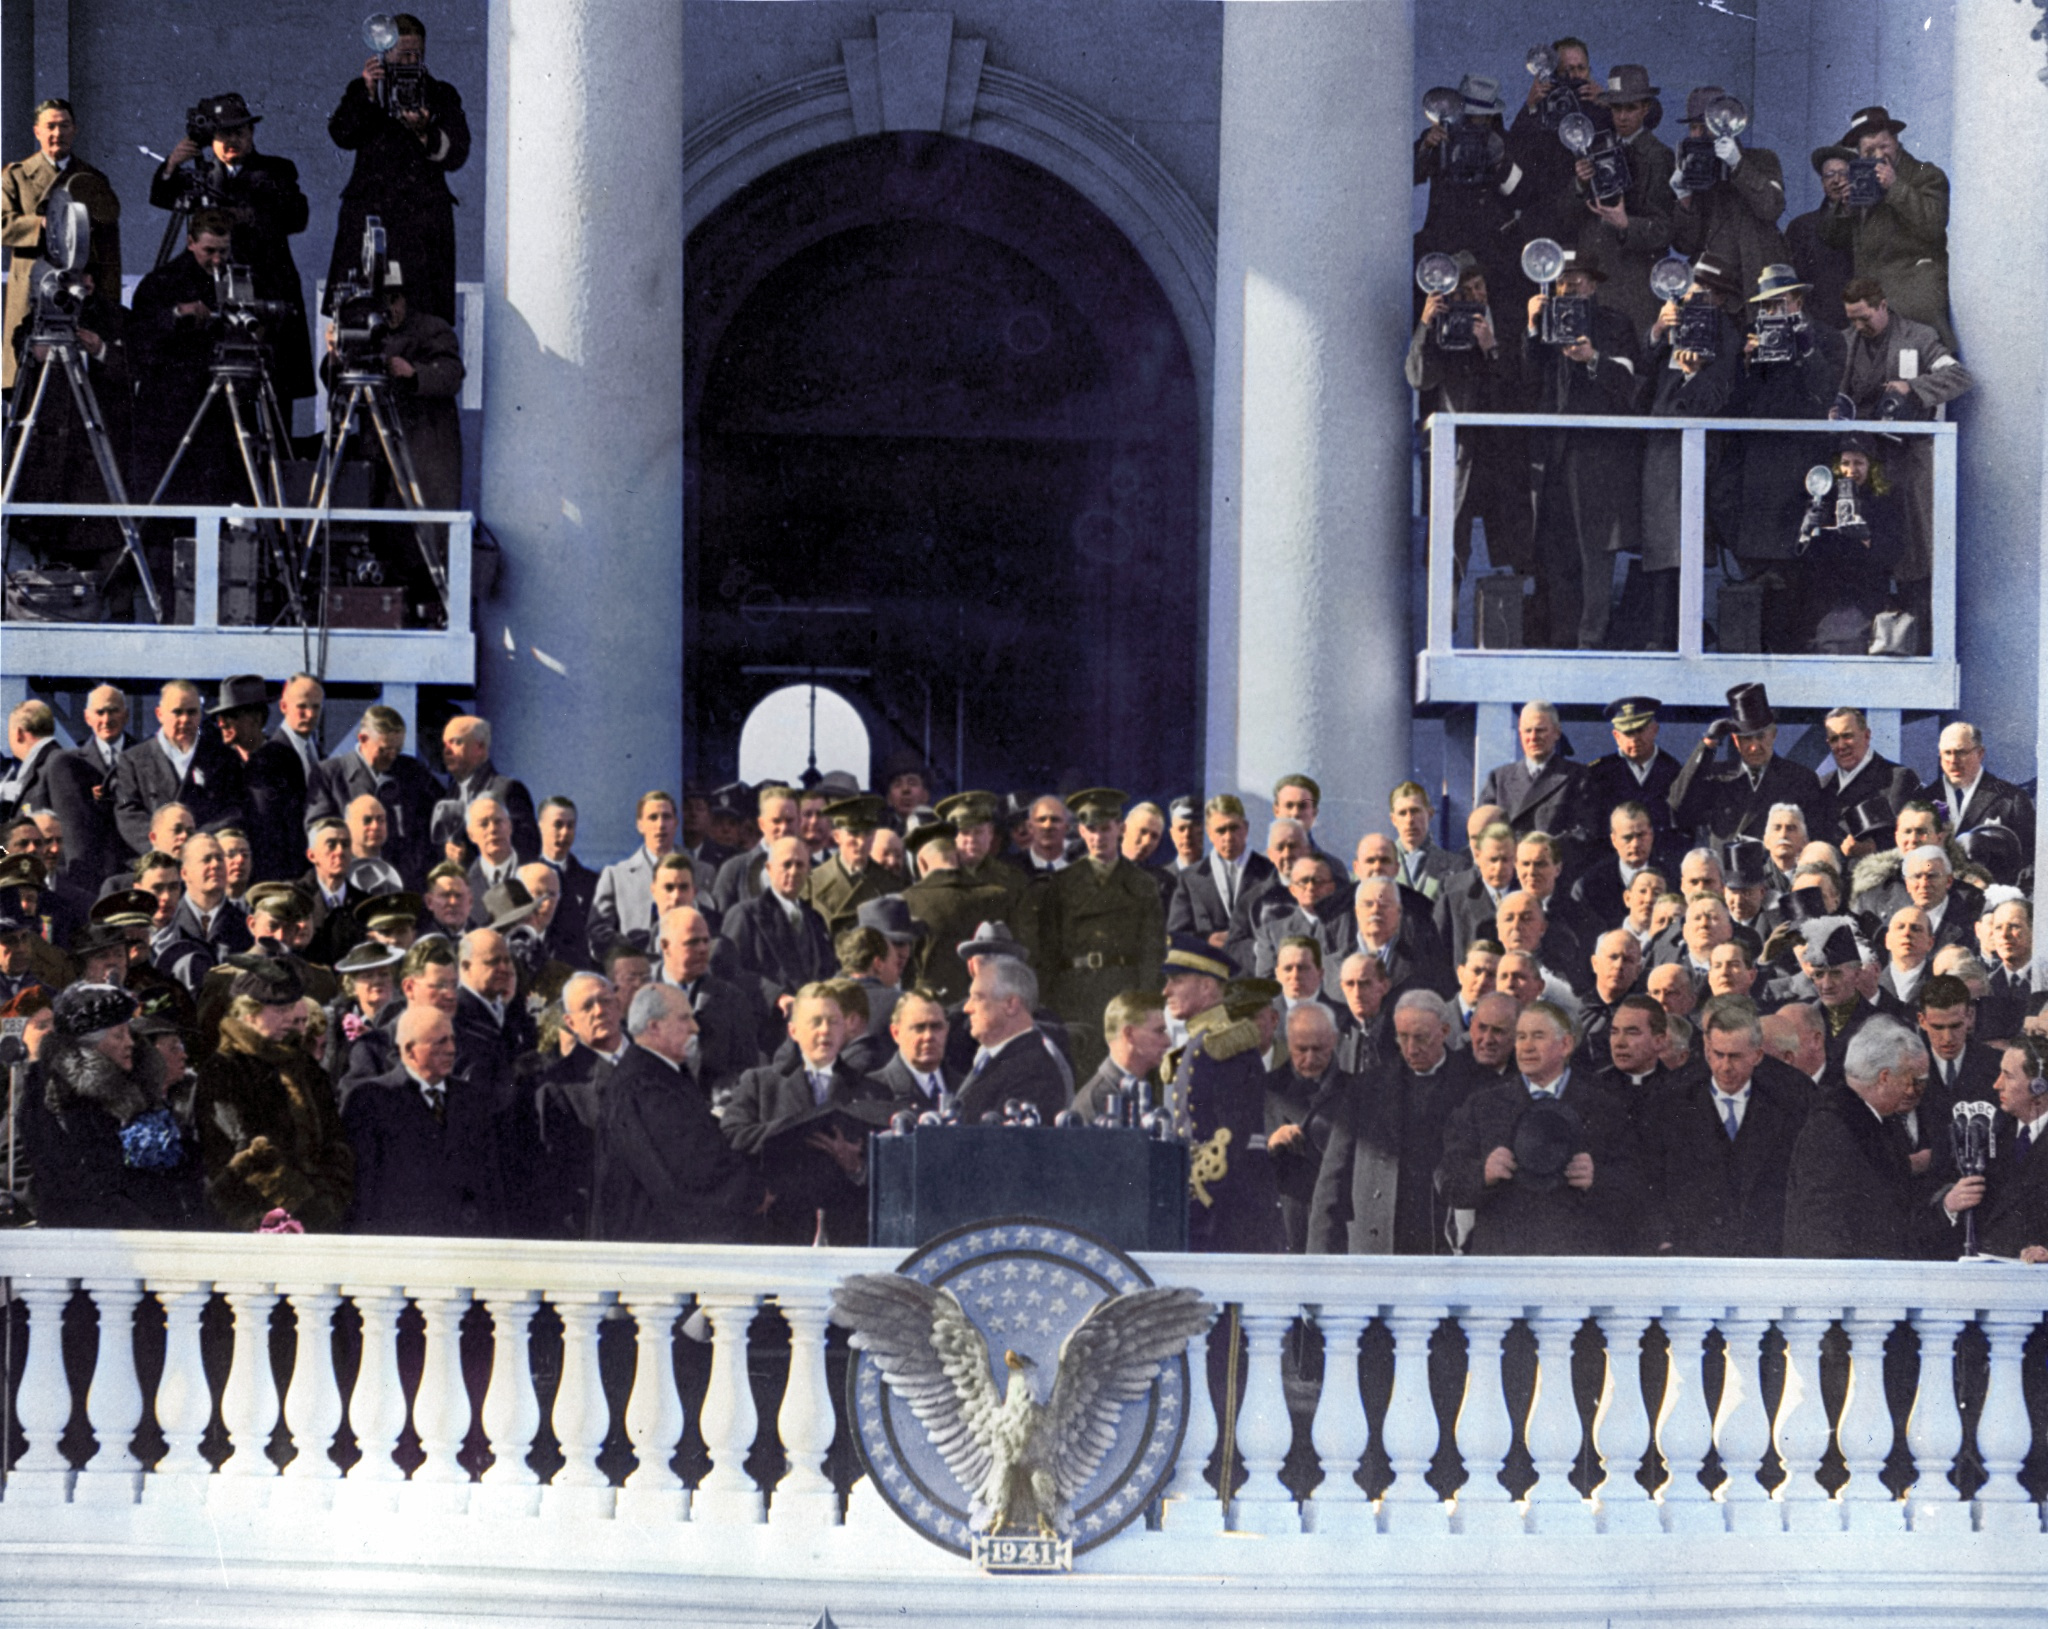 1, FDR Inauguration 1941 (Norman)